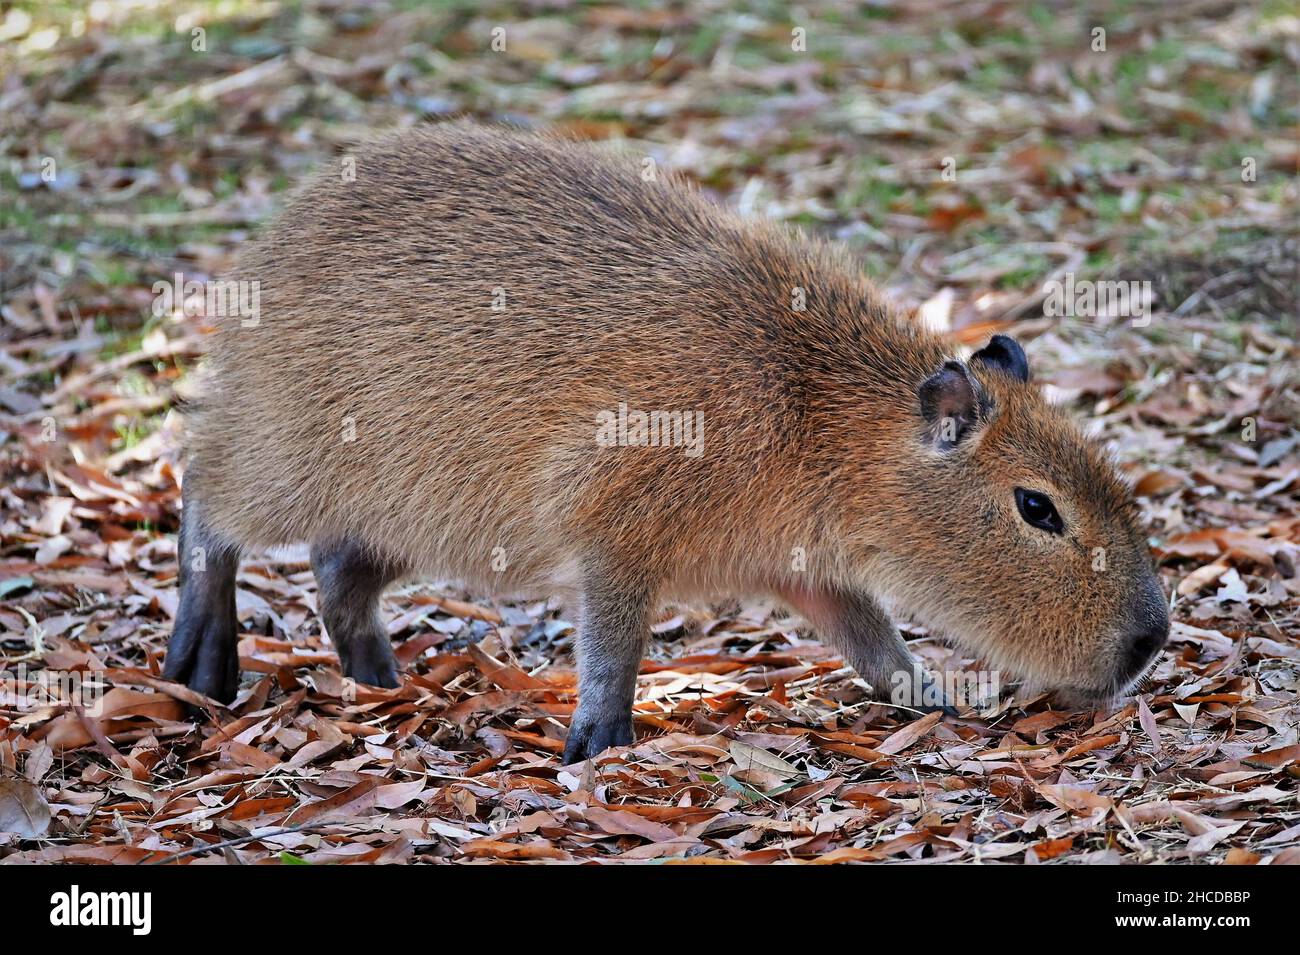 Young Capybara Searching for Food Stock Photo